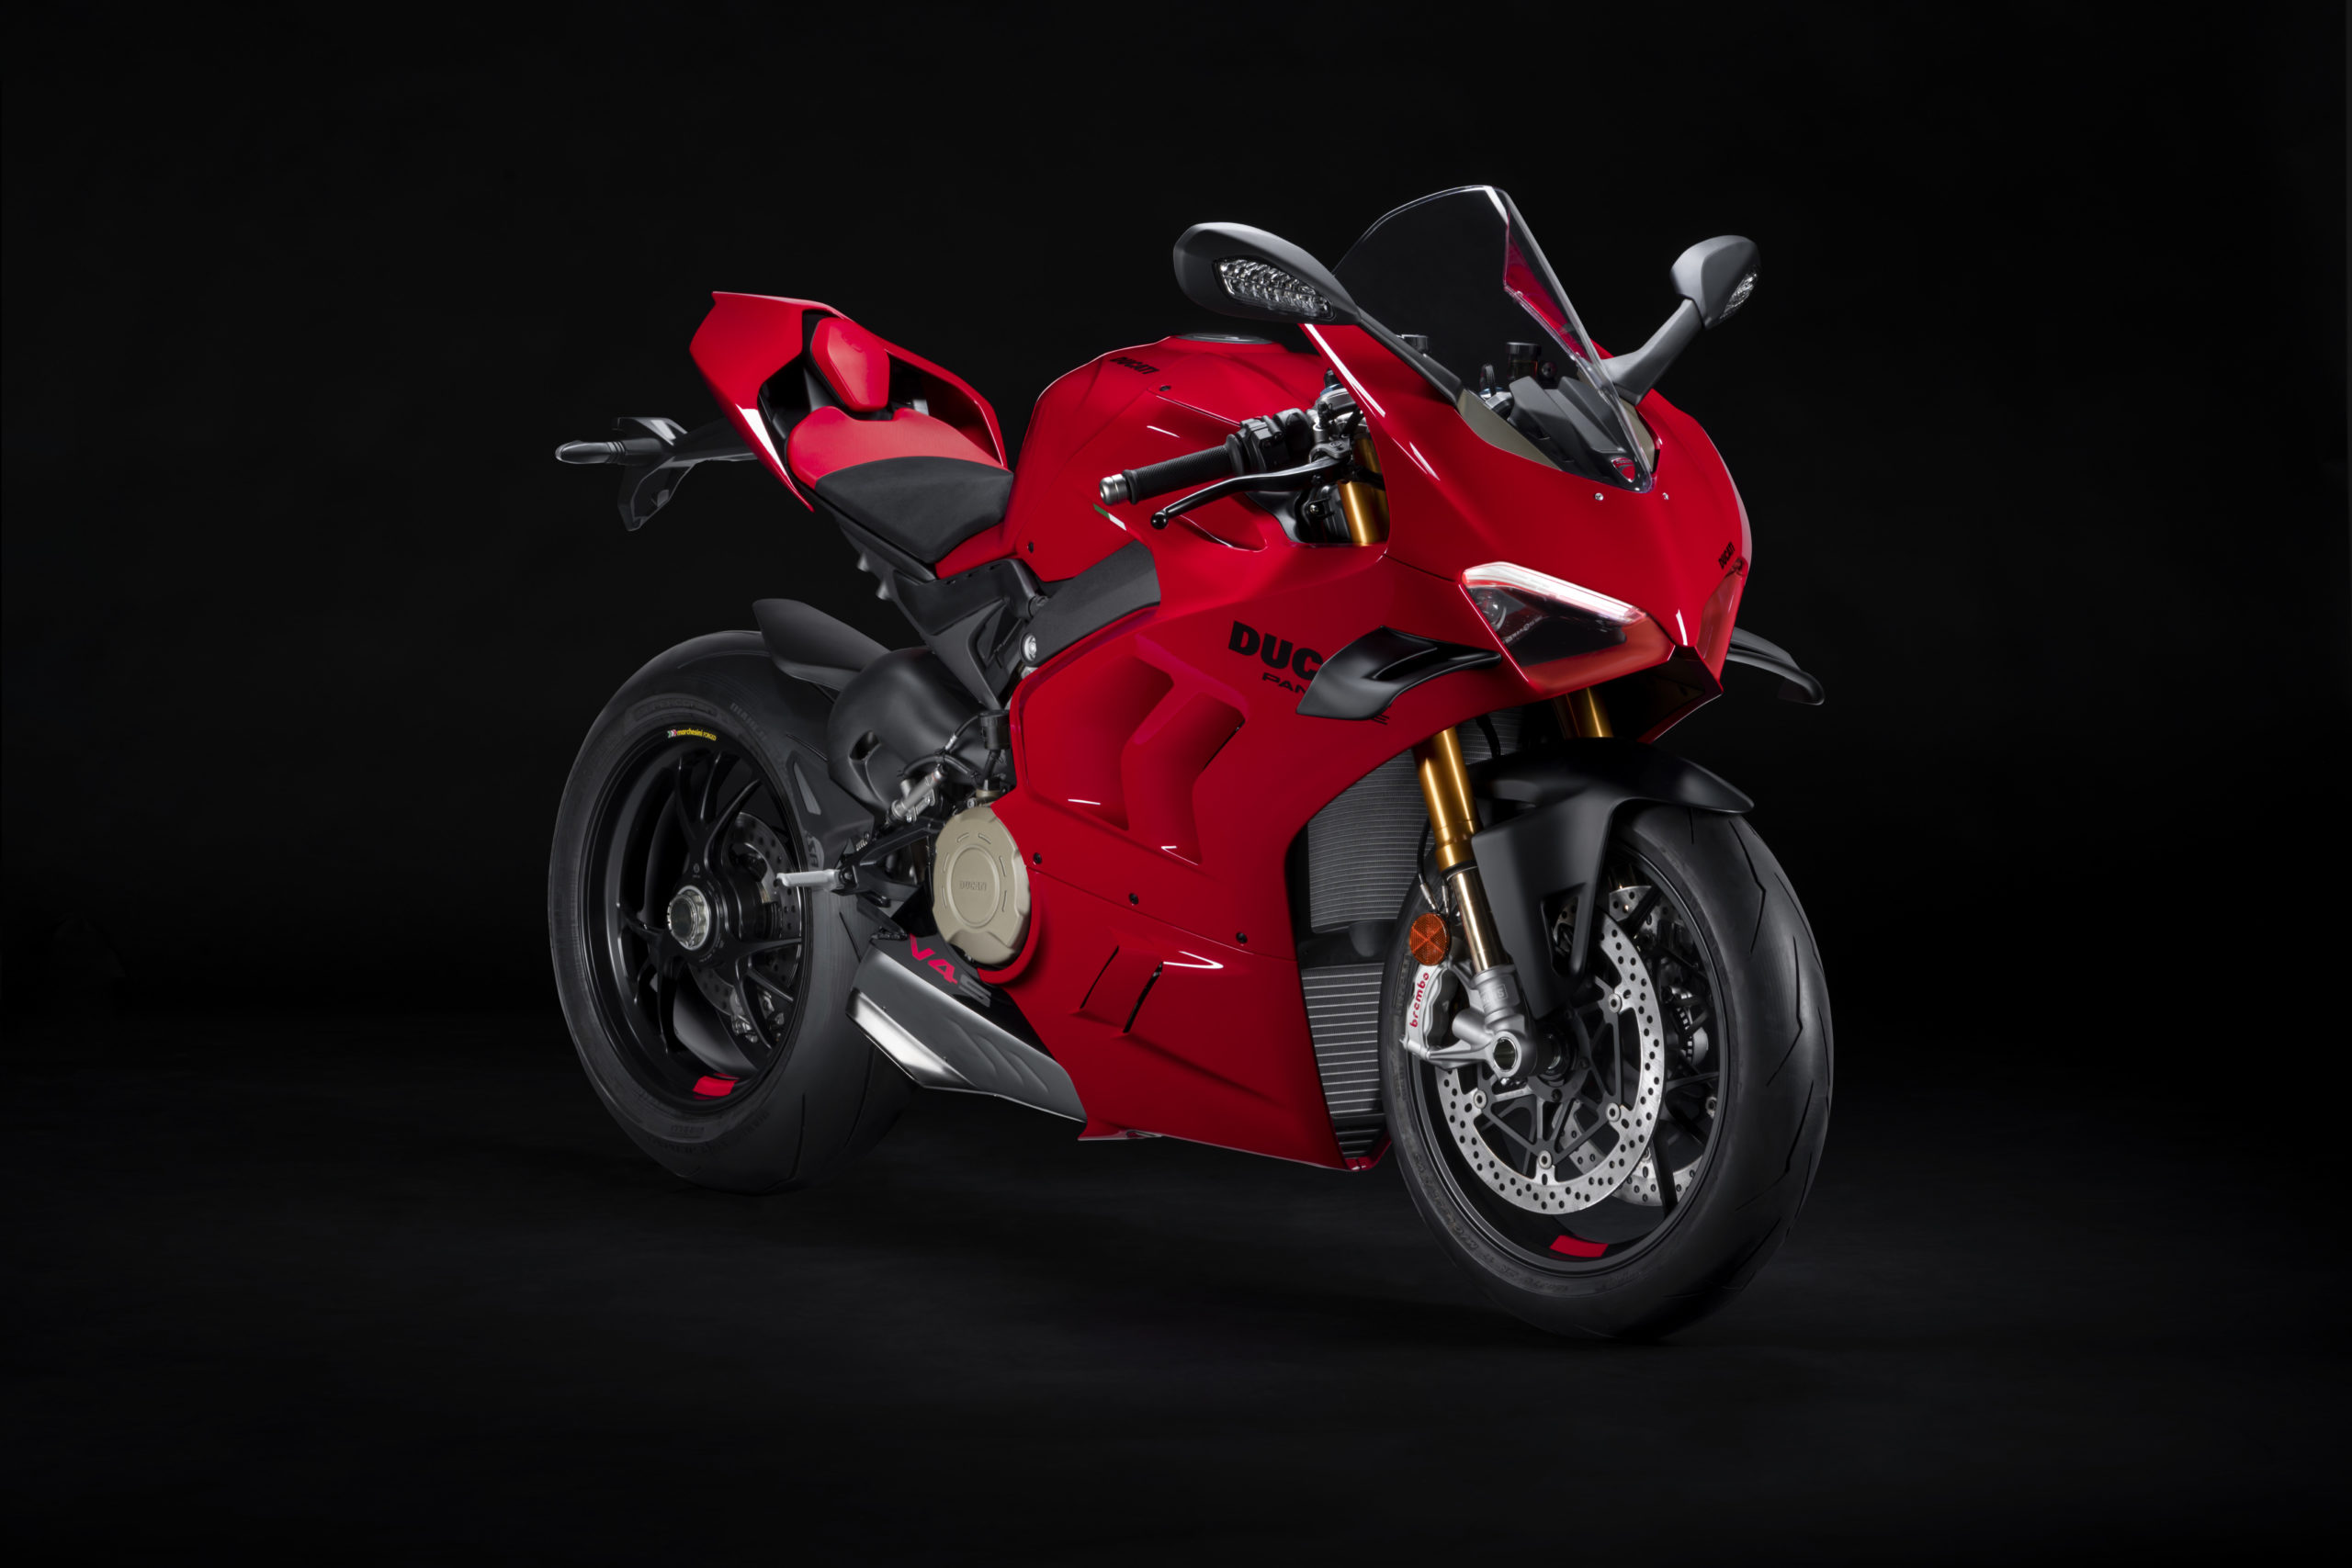 Ducati's new 2022 Panigale V4 and V4 S